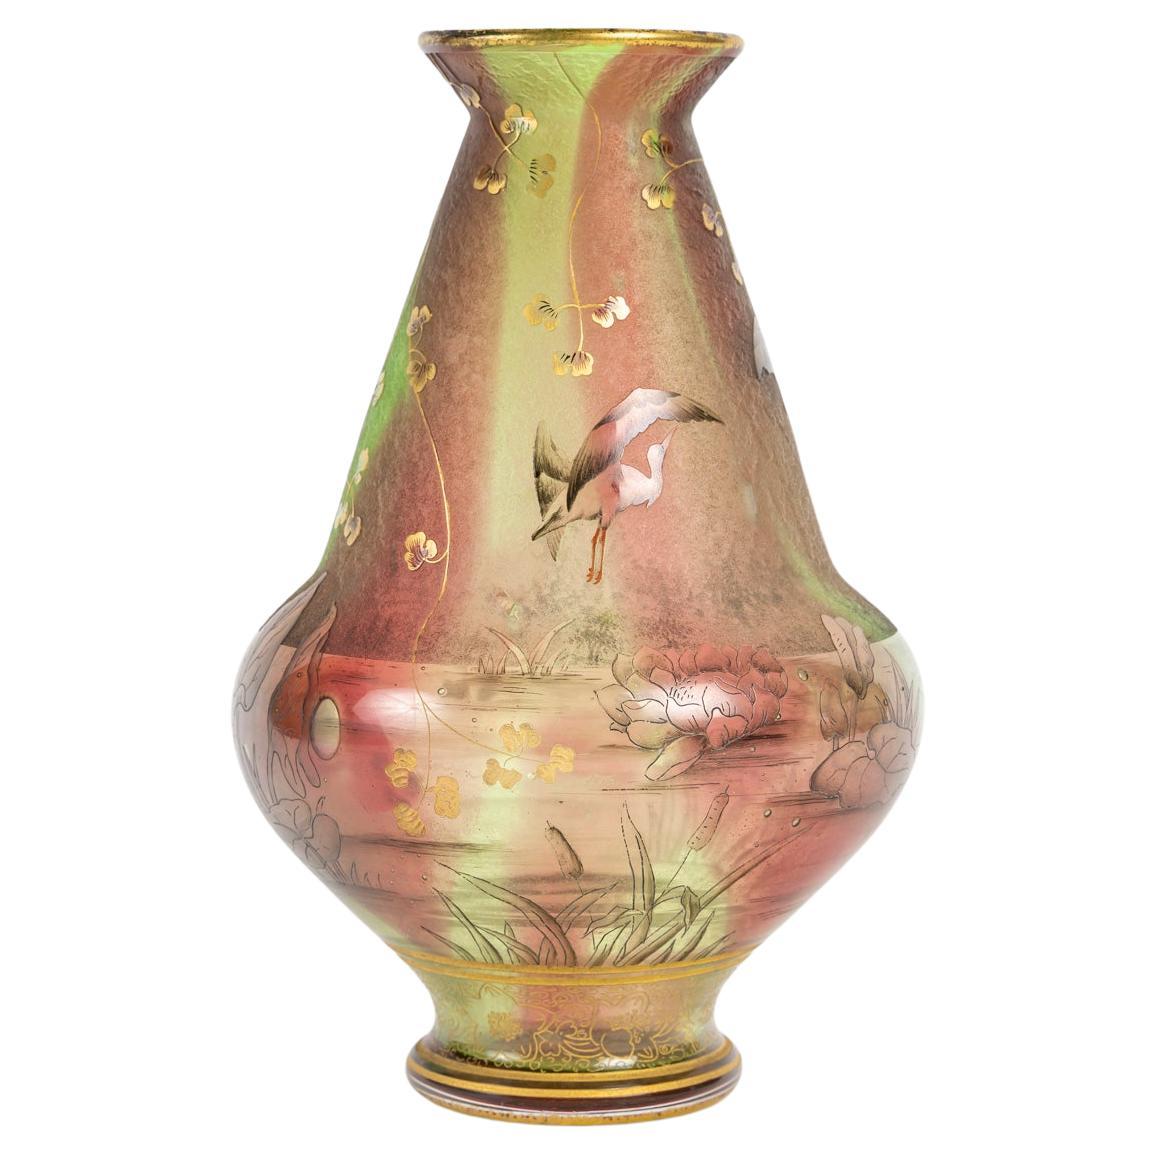 Daum Nancy - Rare Vase With Herons Or Cranes, Reeds And Water Lilies Art Nouveau For Sale